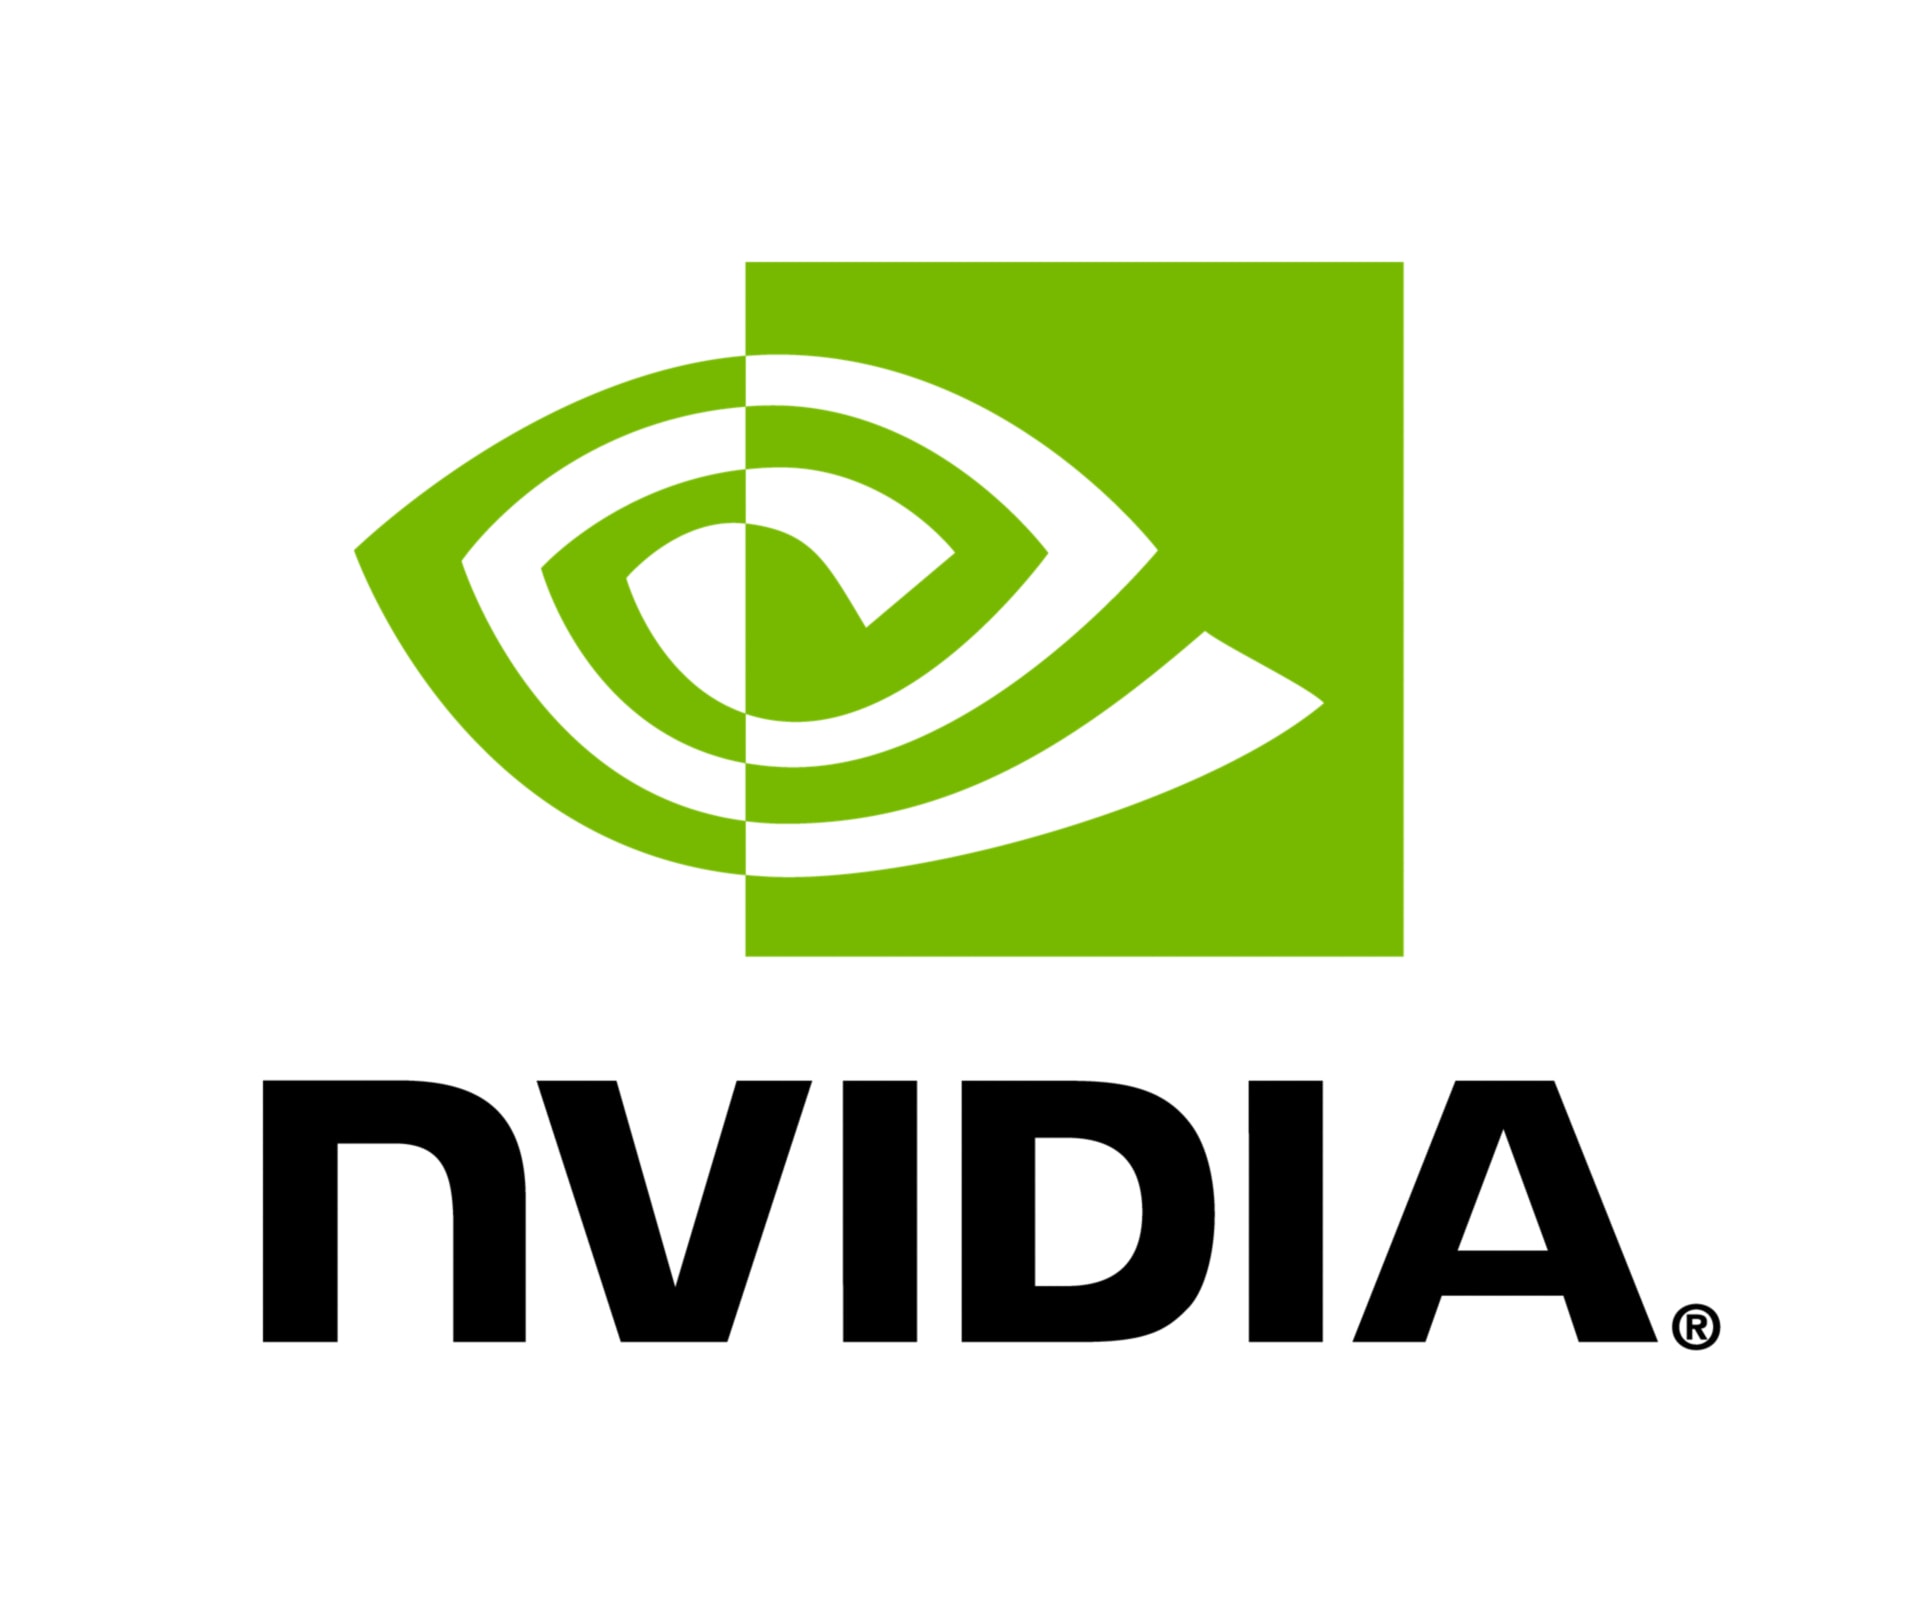 NVIDIA RTX Virtual Workstation - subscription license (3 years) 1 concurren